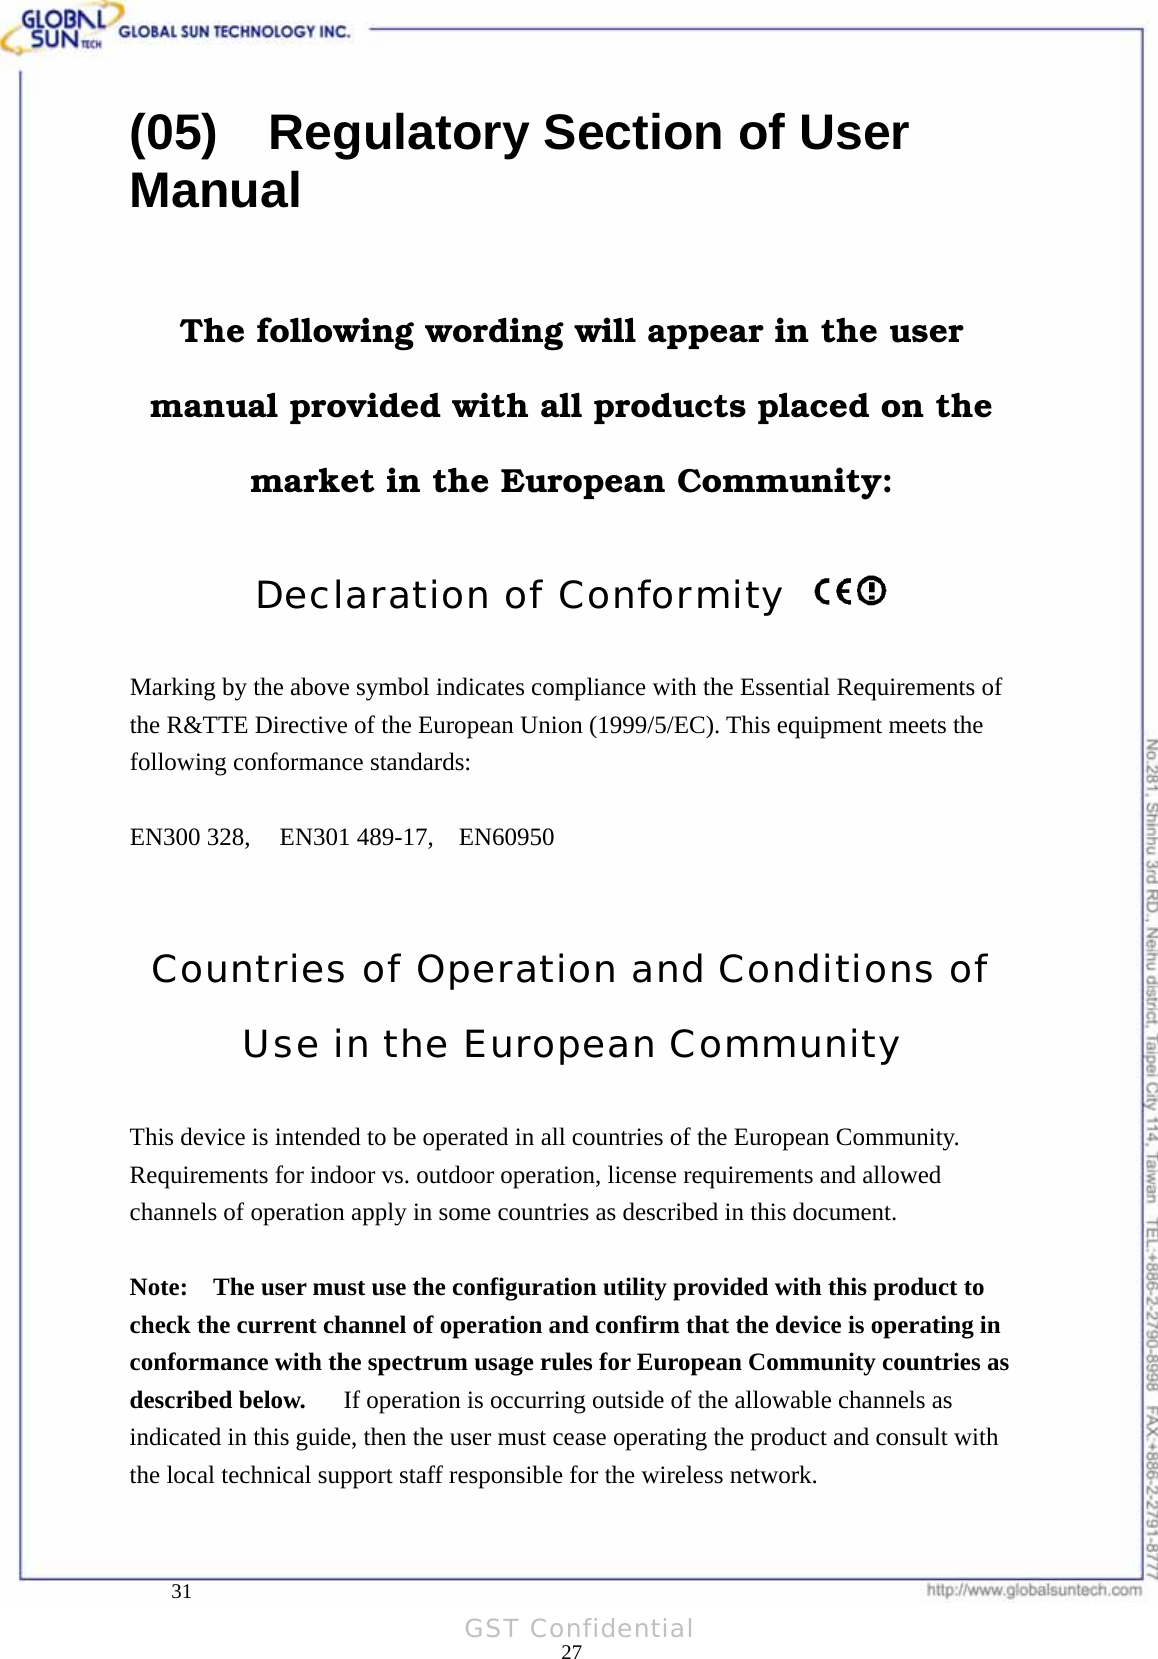  Product: 802.11a/g Wireless USB Dongle Model: WL UD 2554 17A(05)    Regulatory Section of User Manual  The following wording will appear in the user manual provided with all products placed on the market in the European Community:  Declaration of Conformity    Marking by the above symbol indicates compliance with the Essential Requirements of the R&amp;TTE Directive of the European Union (1999/5/EC). This equipment meets the following conformance standards:  EN300 328,   EN301 489-17,  EN60950   Countries of Operation and Conditions of Use in the European Community  This device is intended to be operated in all countries of the European Community.   Requirements for indoor vs. outdoor operation, license requirements and allowed channels of operation apply in some countries as described in this document.  Note:   The user must use the configuration utility provided with this product to check the current channel of operation and confirm that the device is operating in conformance with the spectrum usage rules for European Community countries as described below.   If operation is occurring outside of the allowable channels as indicated in this guide, then the user must cease operating the product and consult with the local technical support staff responsible for the wireless network.      31 27GST Confidential 